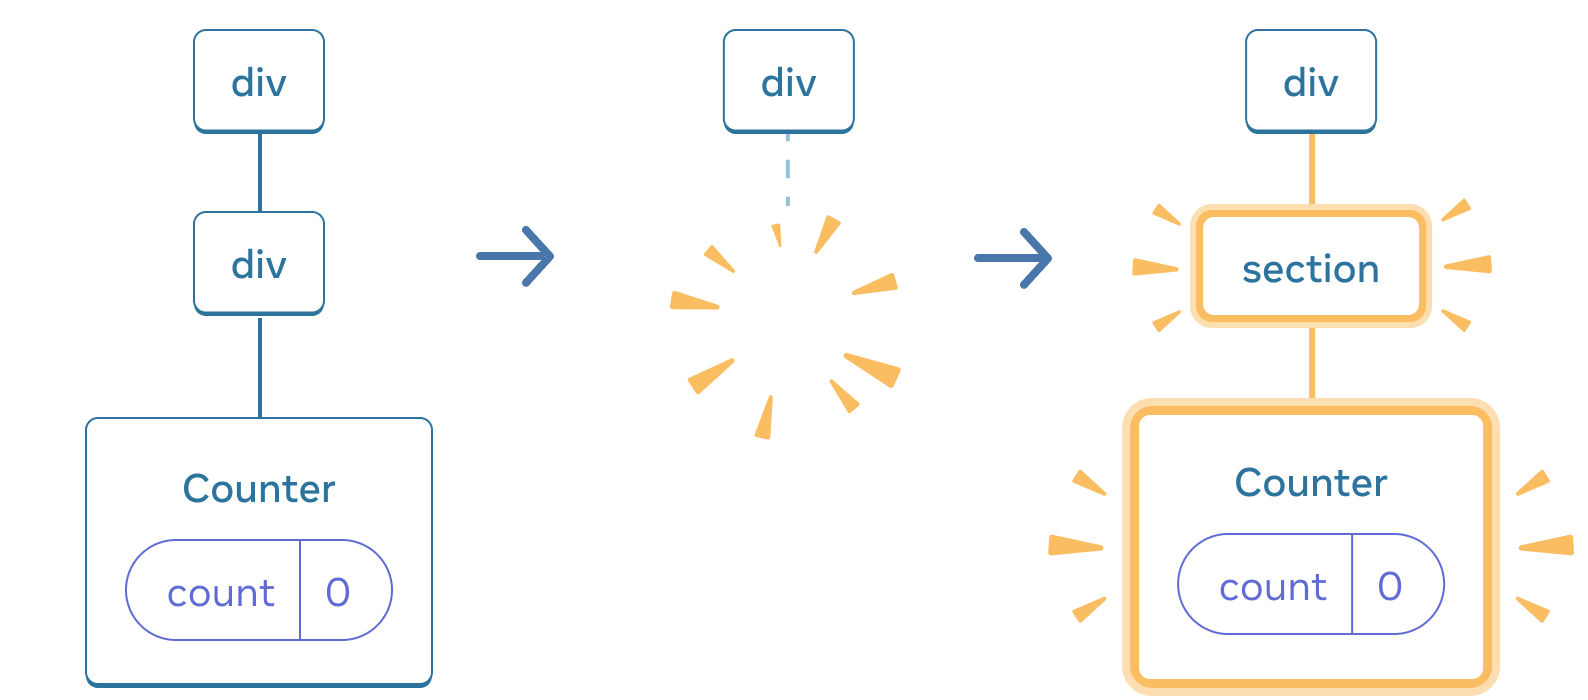 Diagram with three sections, with an arrow transitioning each section in between. The first section contains a React component labeled 'div' with a single child labeled 'div', which has a single child labeled 'Counter' containing a state bubble labeled 'count' with value 0. The middle section has the same 'div' parent, but the child components have now been deleted, indicated by a yellow 'proof' image. The third section has the same 'div' parent again, now with a new child labeled 'section', highlighted in yellow, also with a new child labeled 'Counter' containing a state bubble labeled 'count' with value 0, all highlighted in yellow.